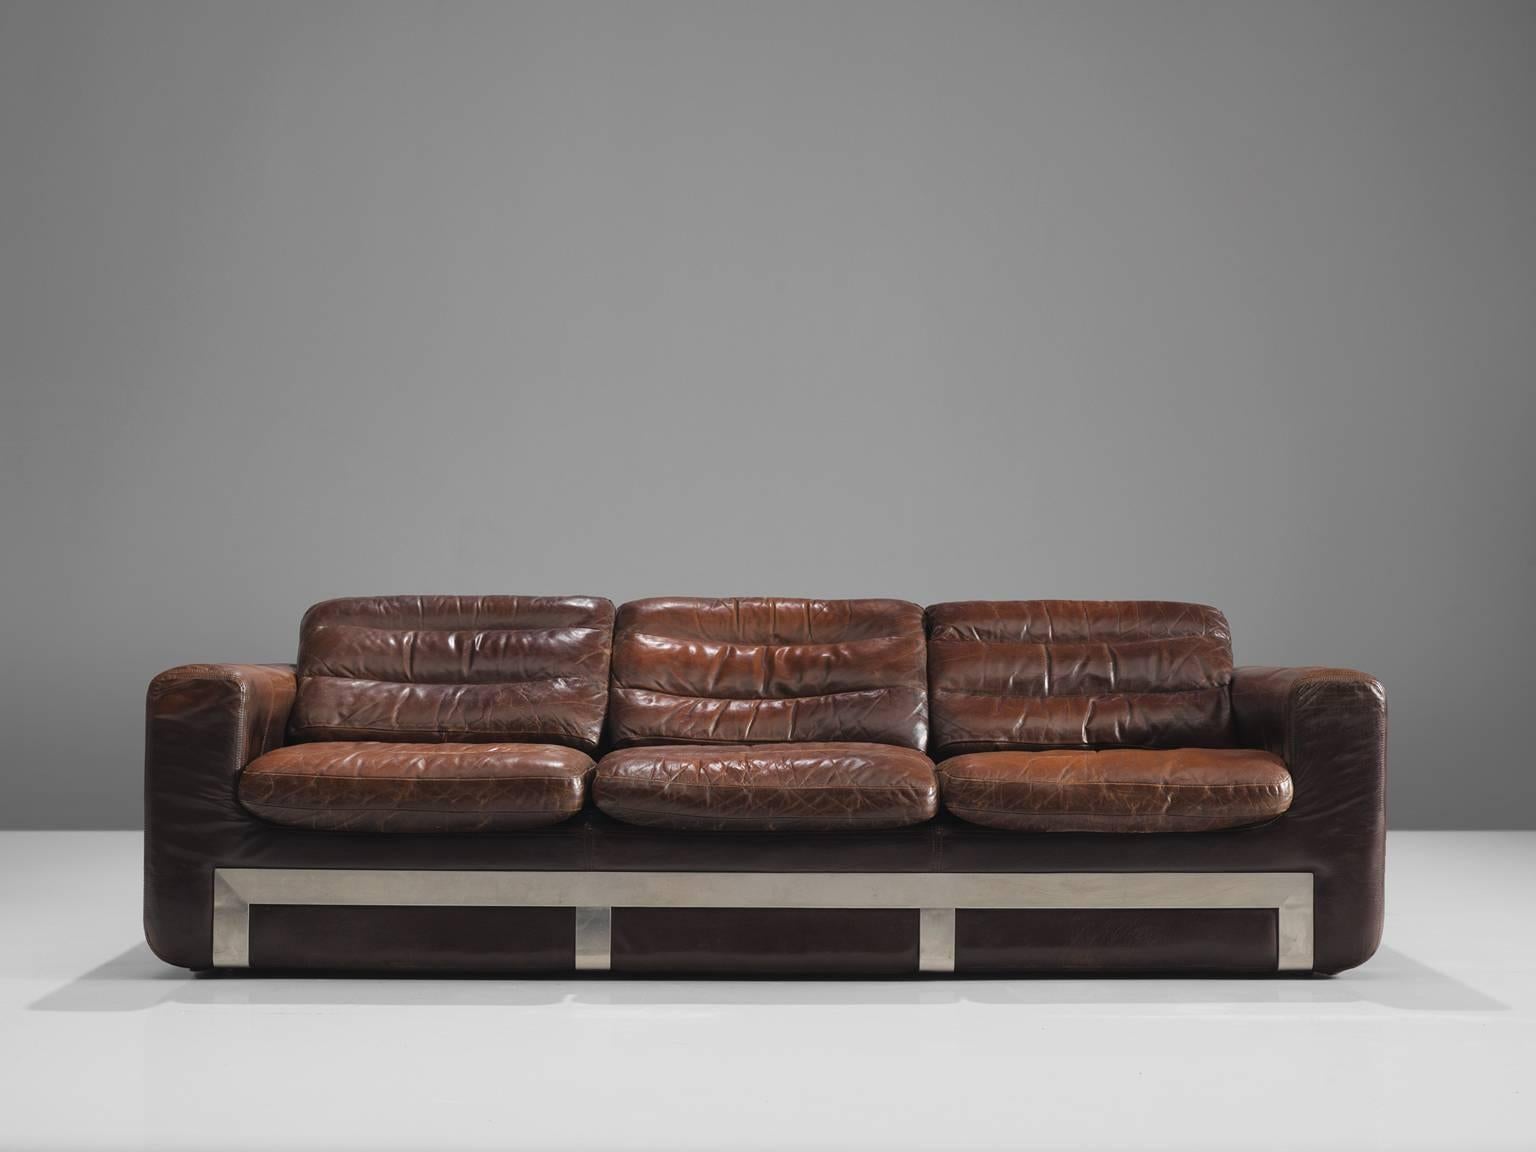 Roche Bobois, sofa, leather and steel, France, circa 1970. 

This comfortable sturdy leather and metal sofa is designed and made by Roche Bobois. As for much of Bobois' furniture it showed traits of the aesthetics by Airborne, Bauhaus and other